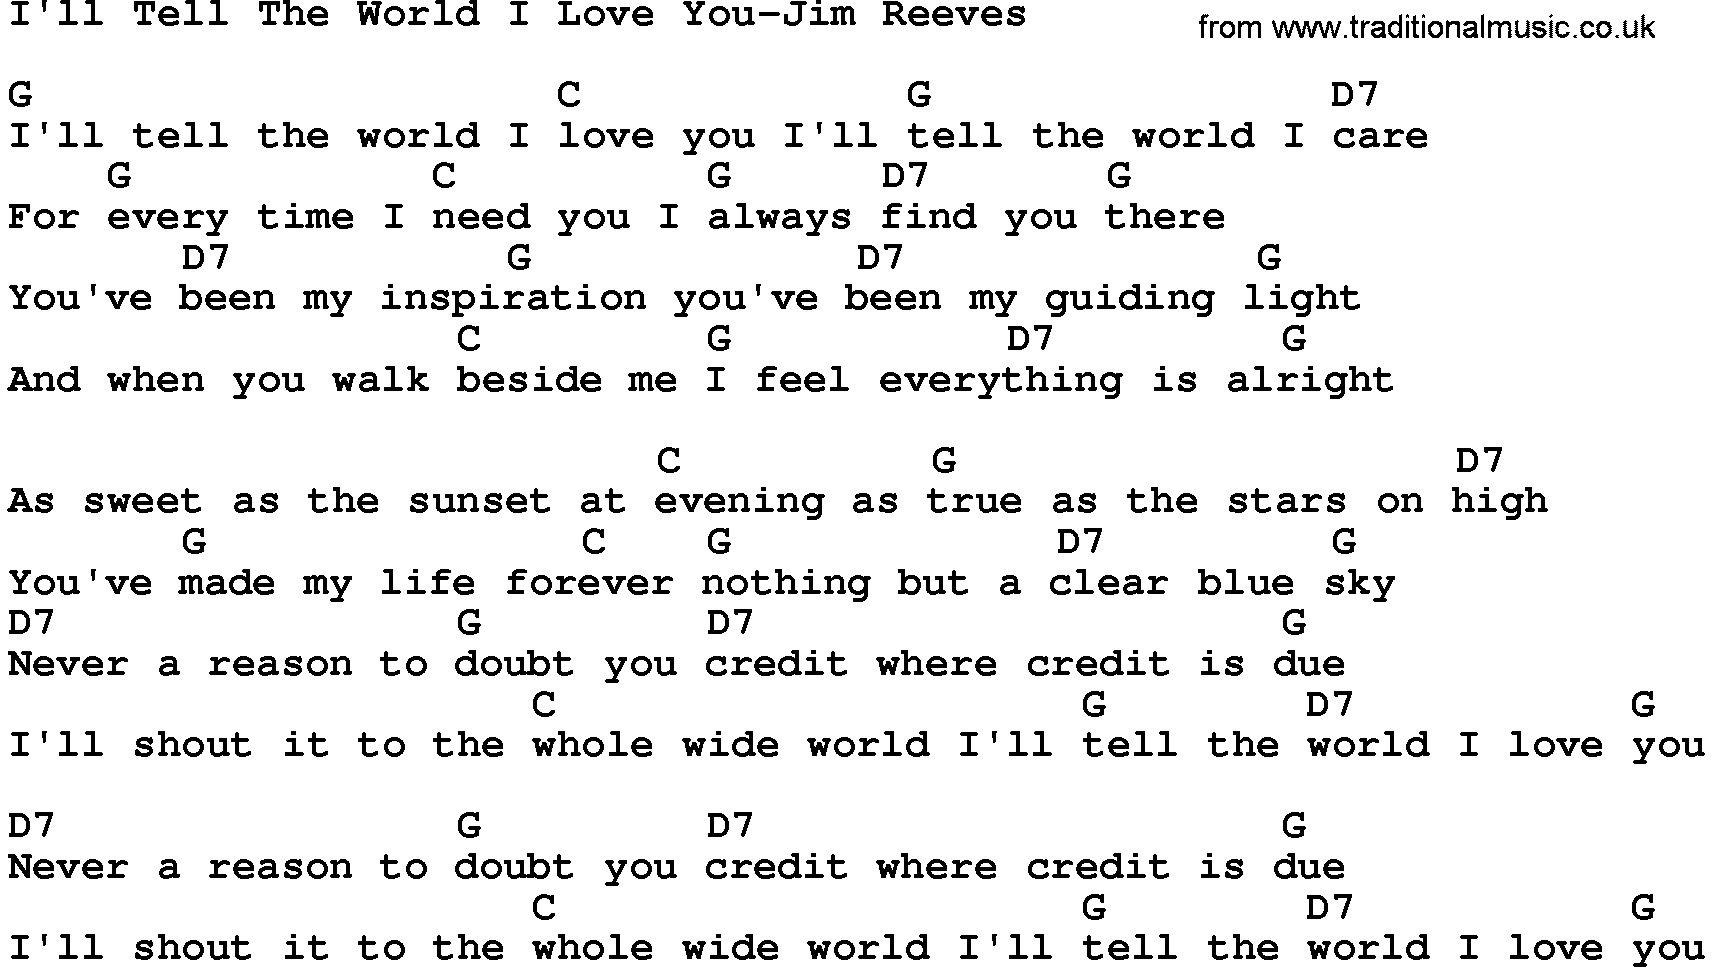 Country music song: I'll Tell The World I Love You-Jim Reeves lyrics and chords